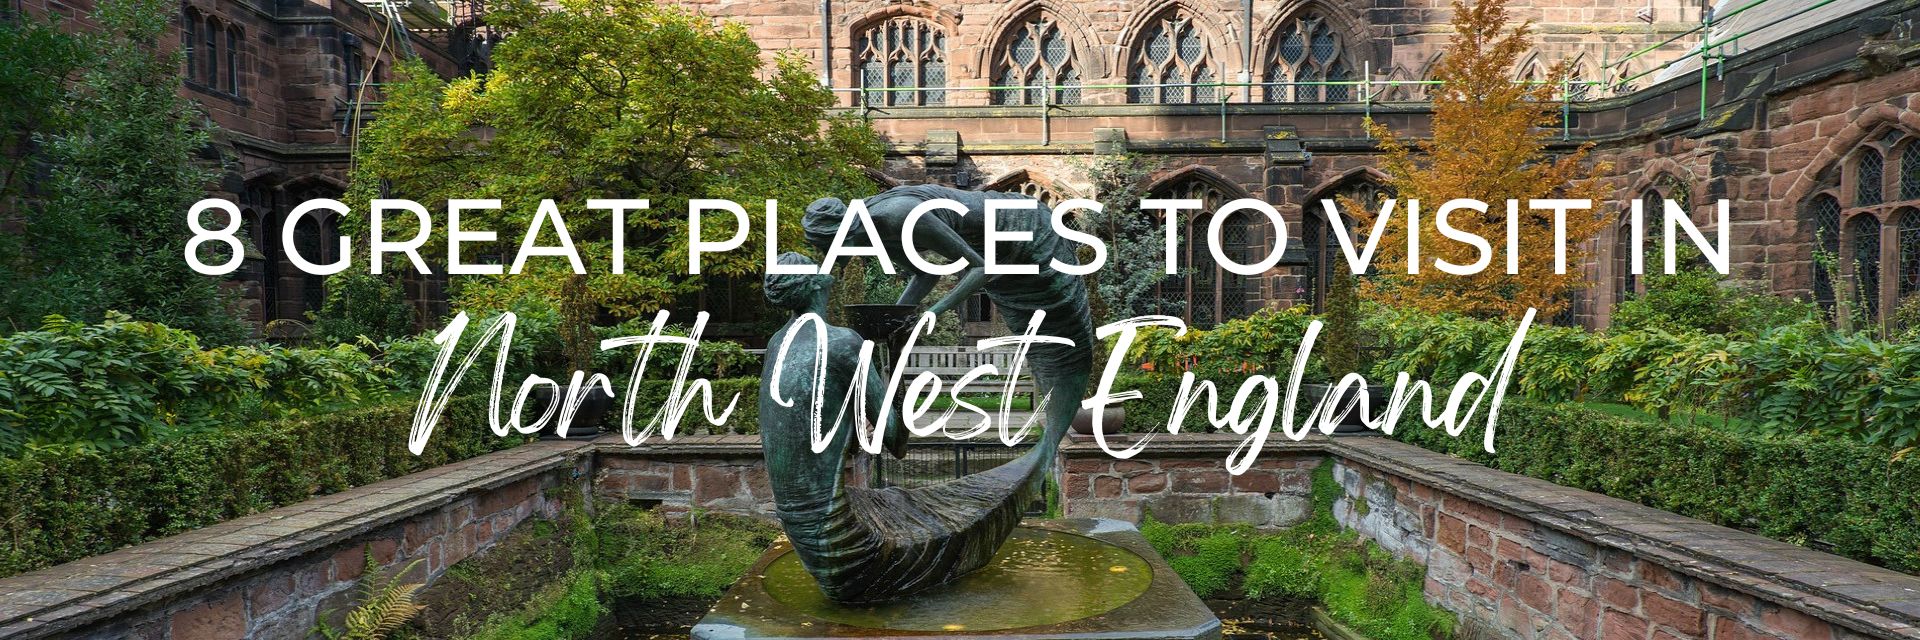 A photo of a stone statue in a pond in a courtyard surrounded by an old stone building. Text on the photo reads "8 Great Places to Visit in North West Englan". 